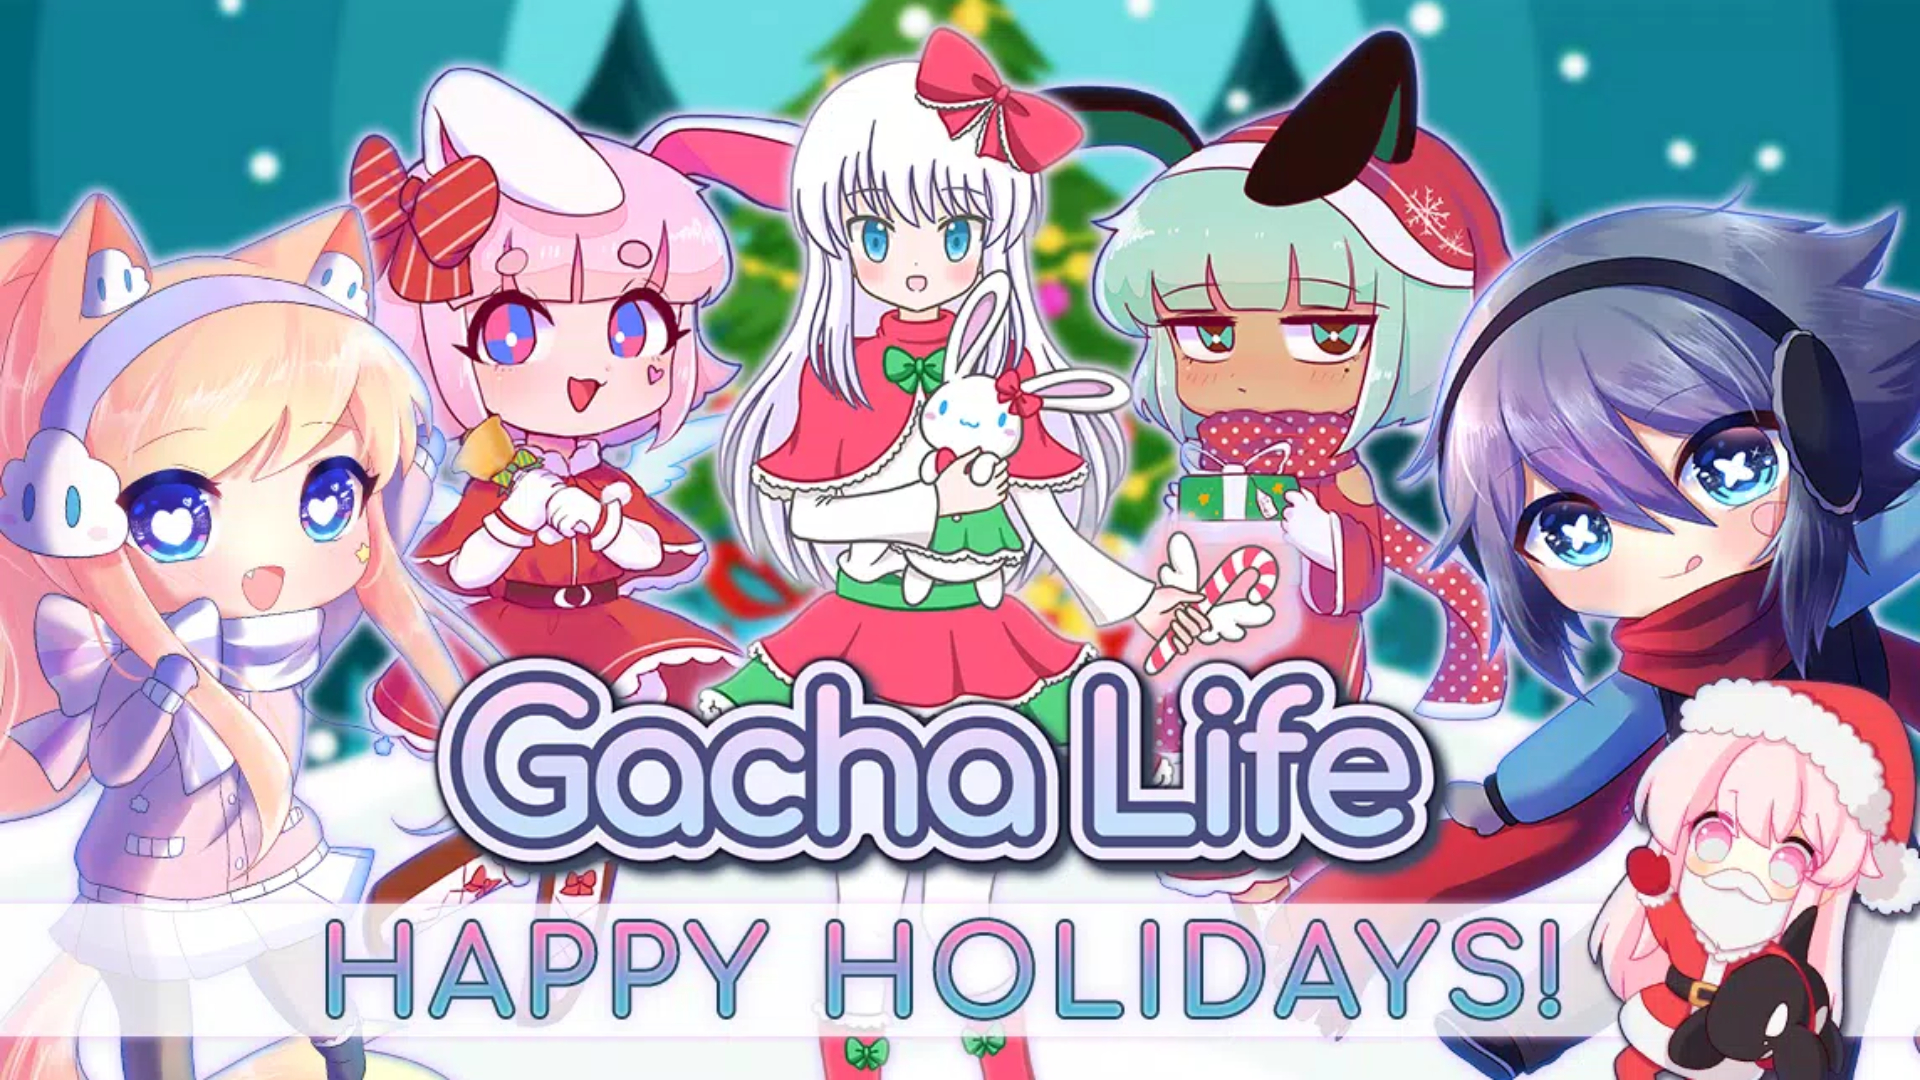 How to Download Gacha Life Old Version image